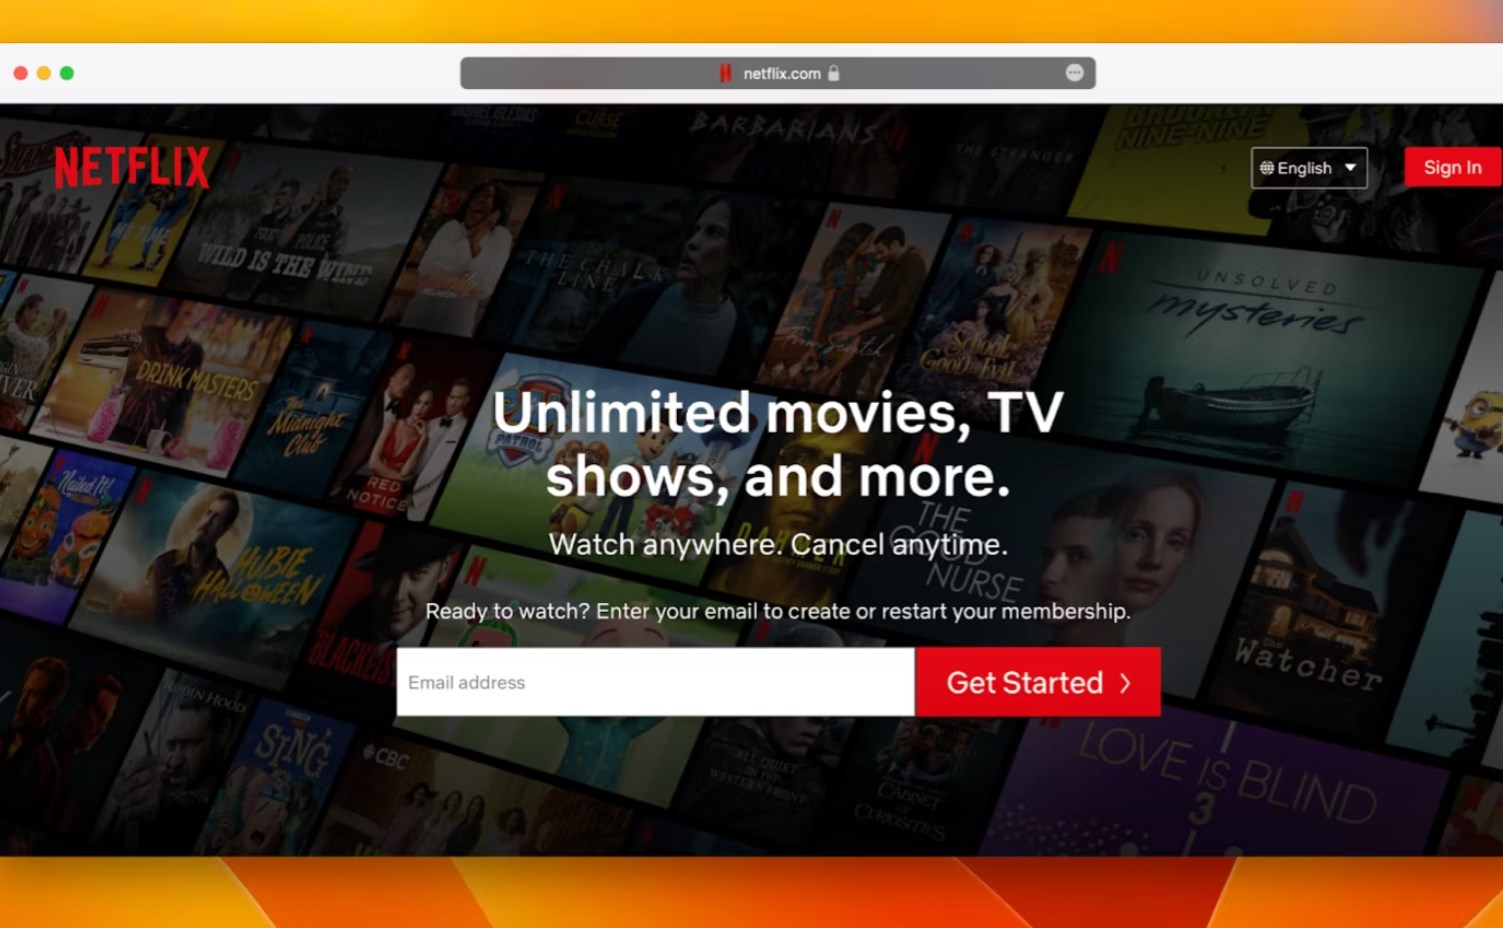 How to Download Movies on Netflix